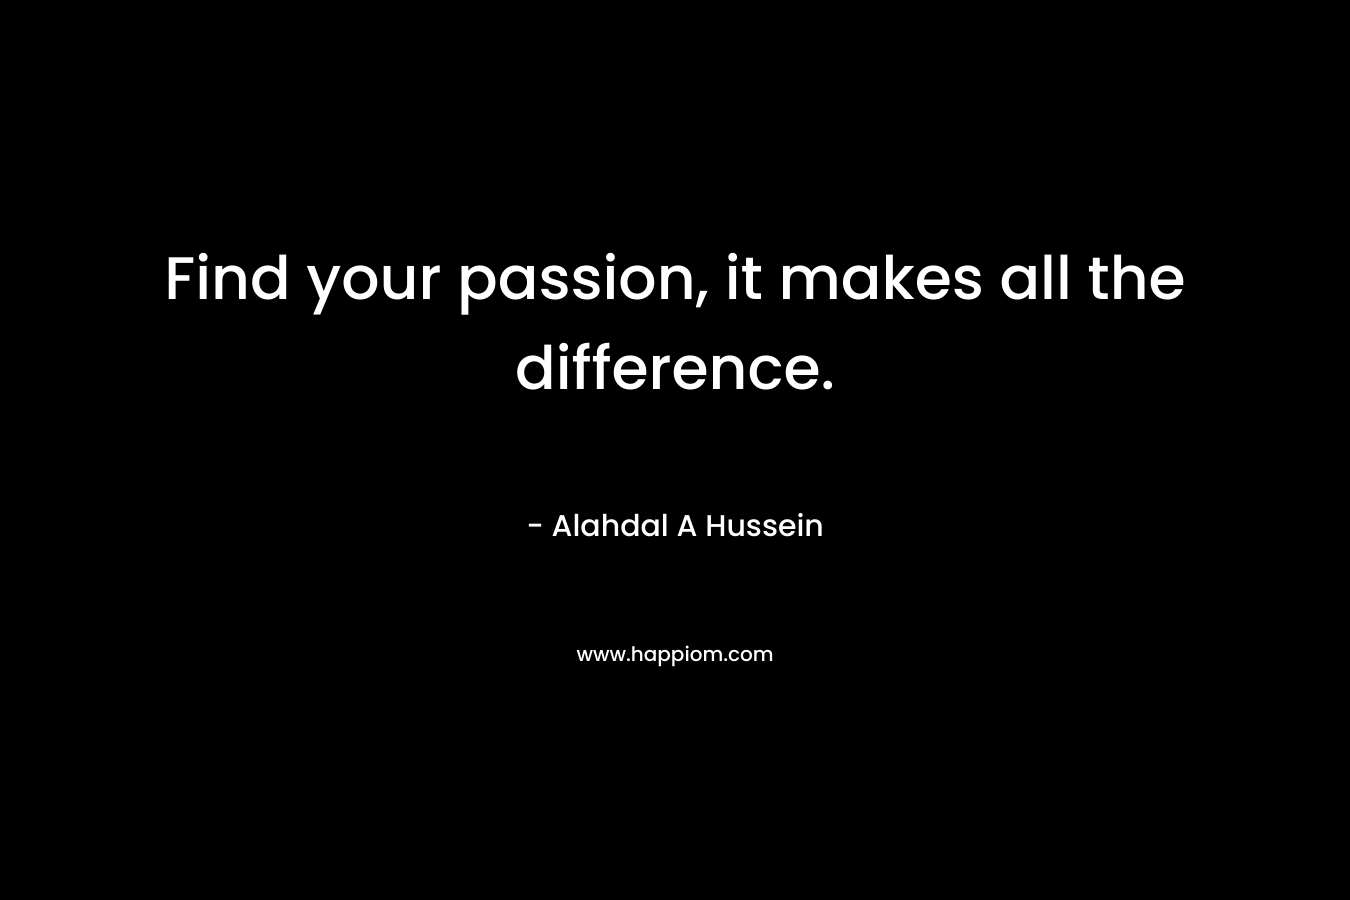 Find your passion, it makes all the difference.